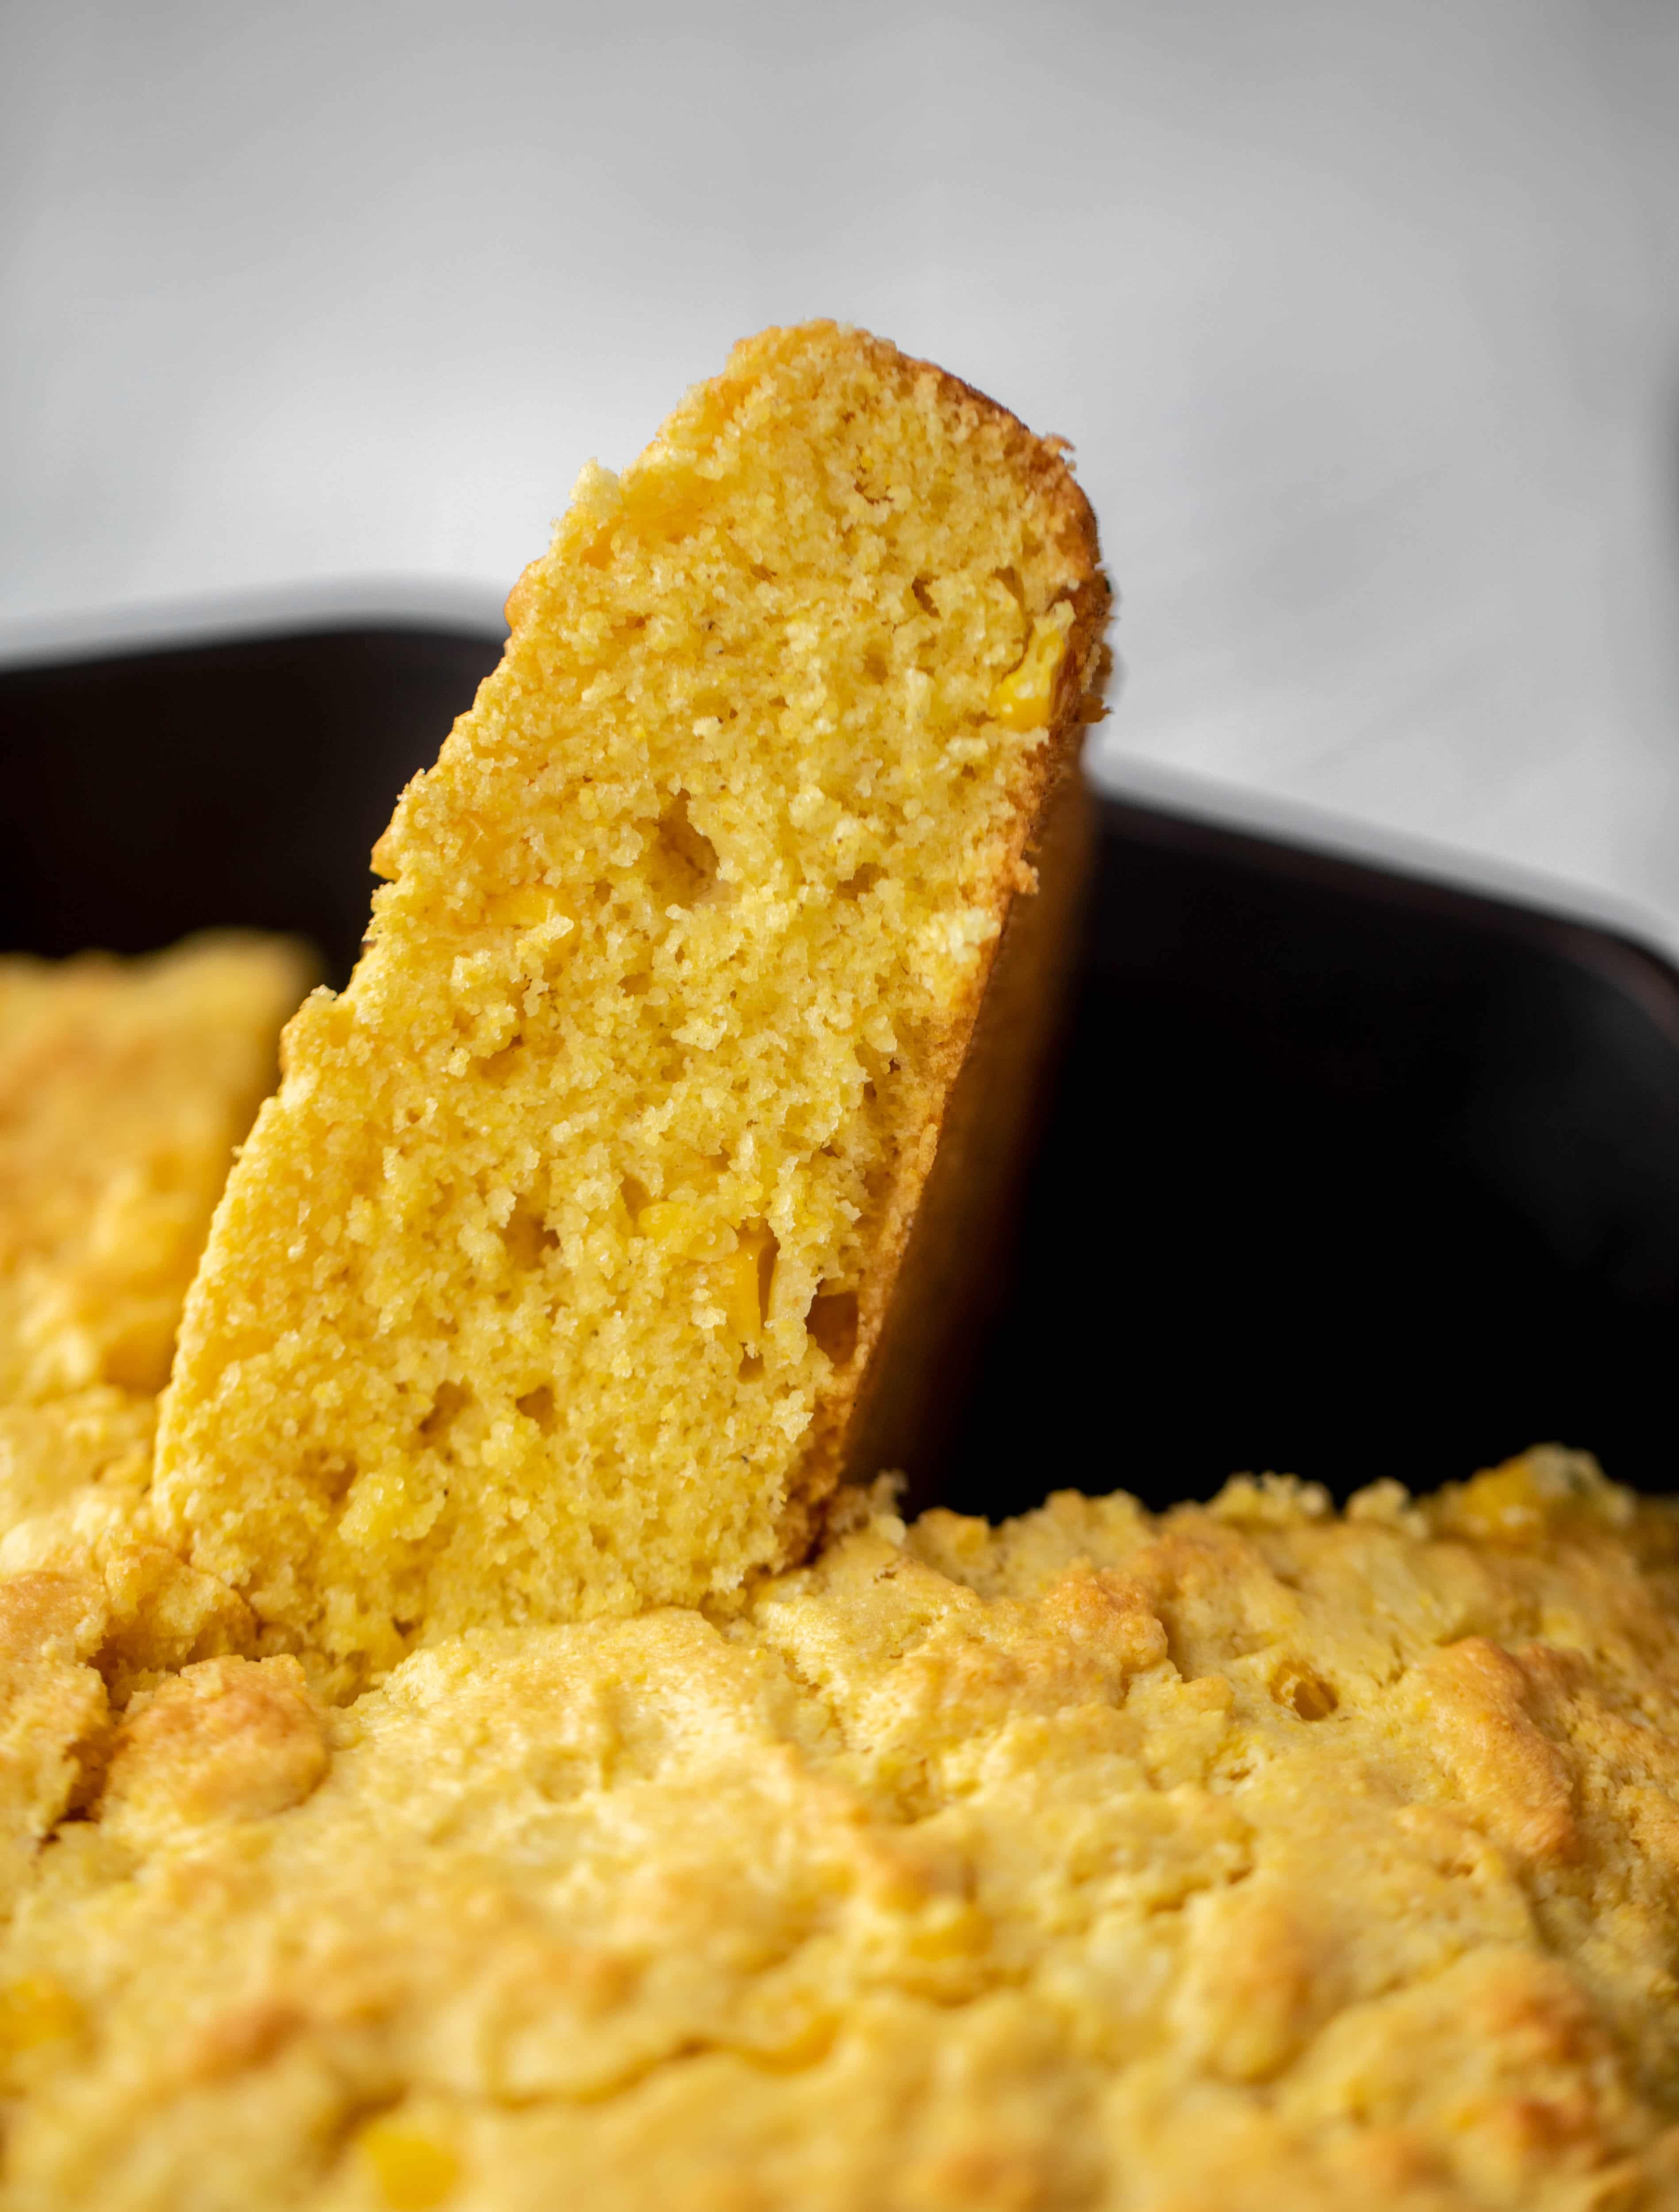 This skillet cornbread is so fluffy and delicious! Serve it hot from the oven with chipotle honey butter. It makes a great appetizer or side dish. 